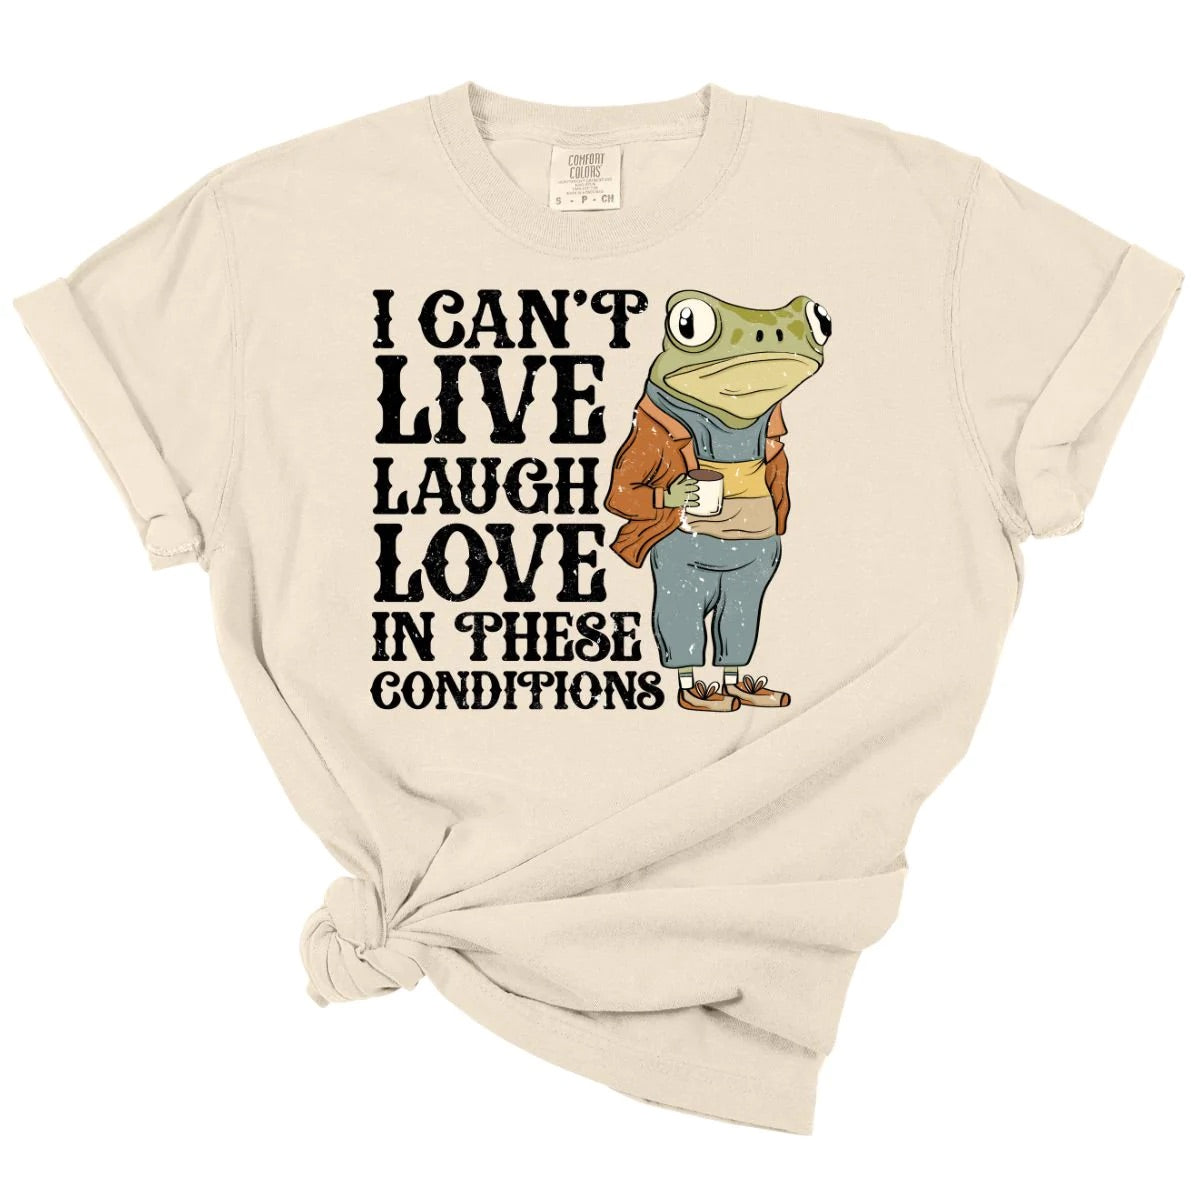 Can't Live Laugh Love Tee *MADE TO ORDER*